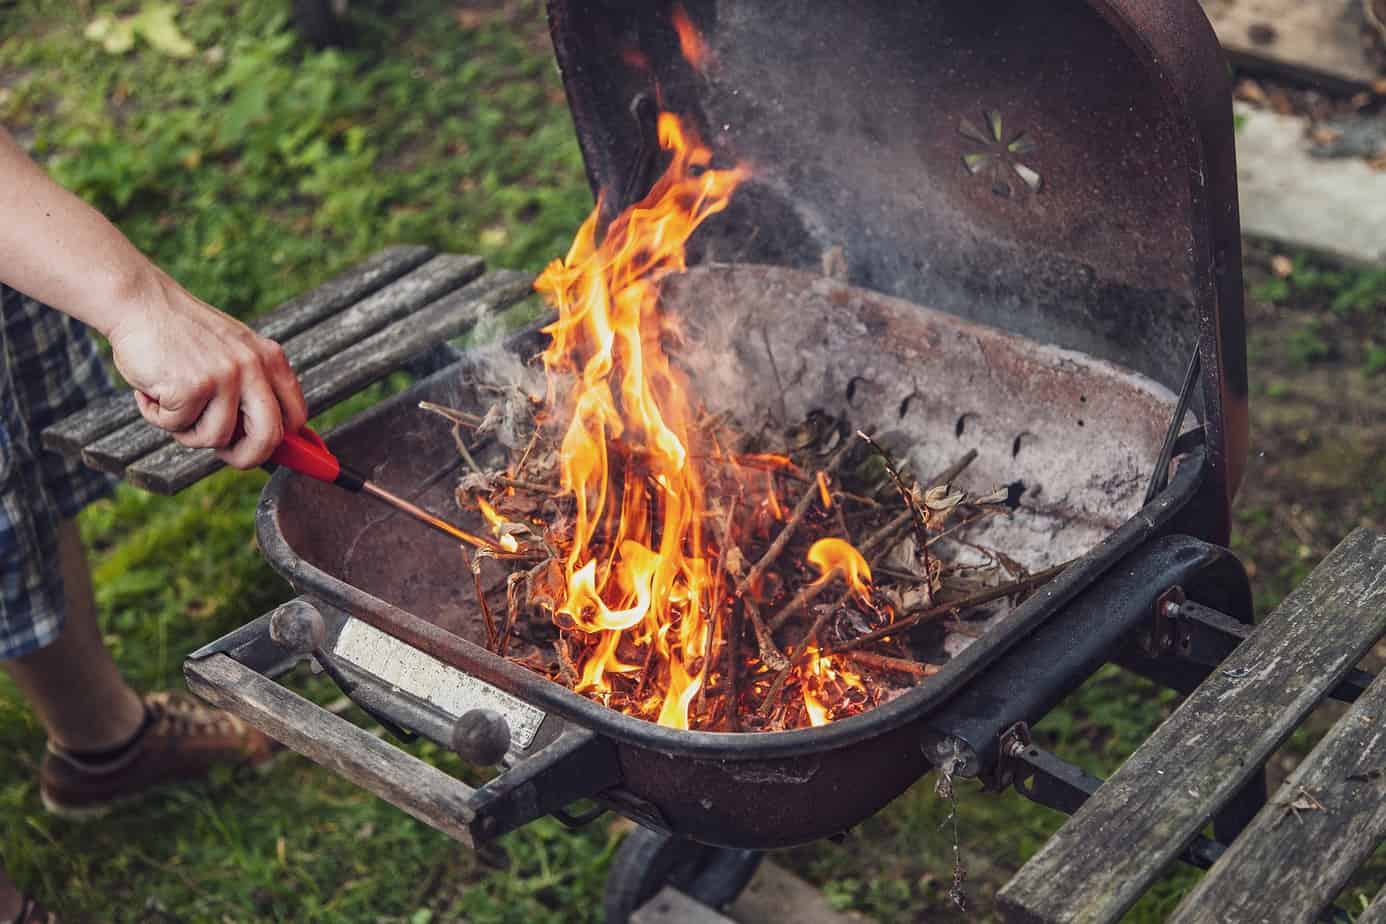 5 Tips To Find The Portable Gas Grill For Tailgating